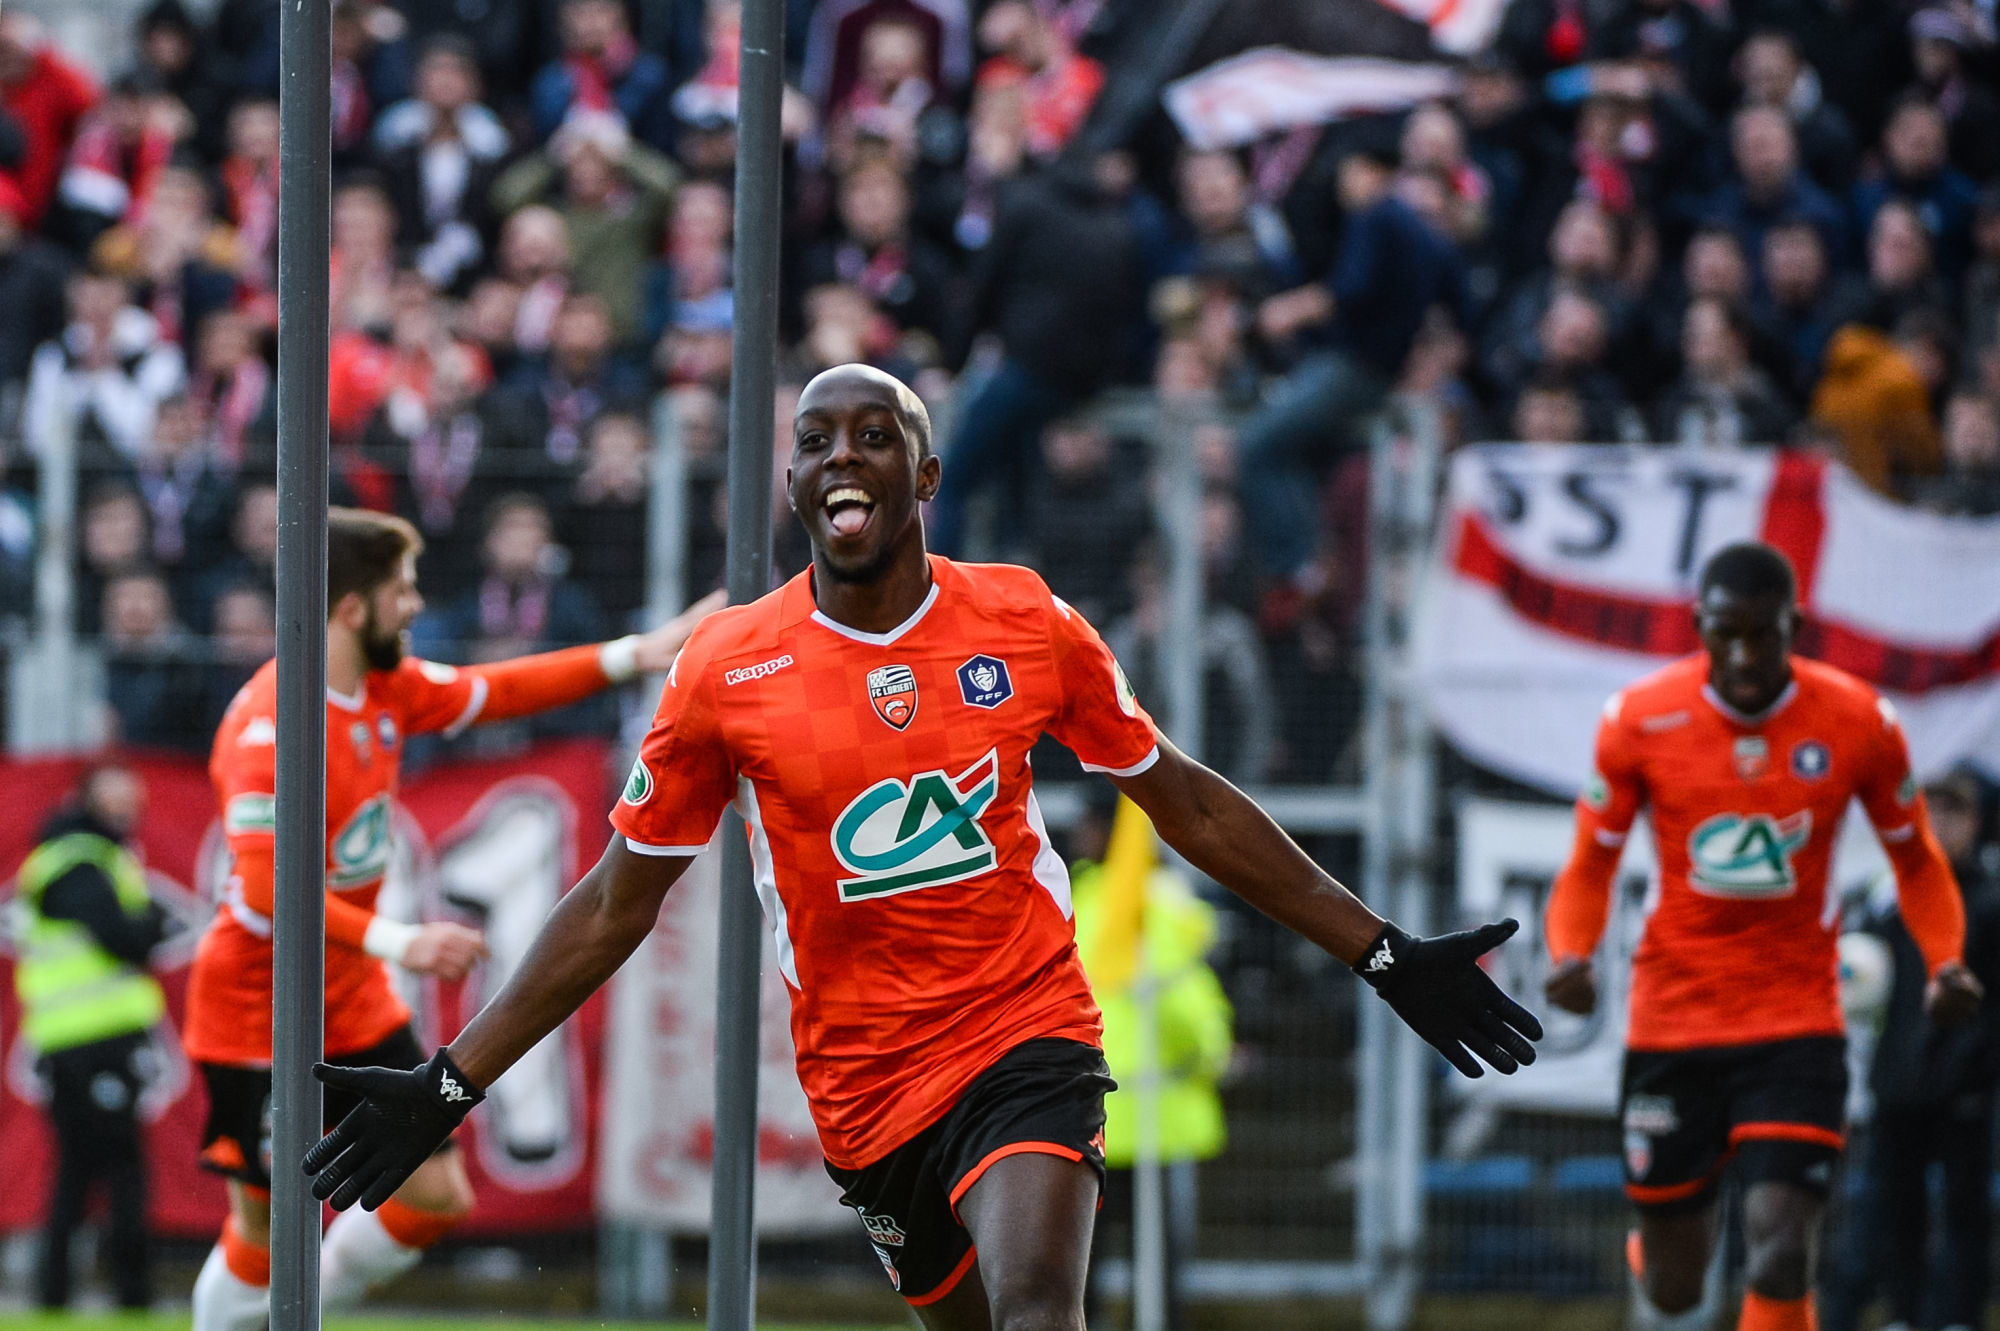 Yoane WISSA of Lorient celebrates his goal during the French Cup Soccer match between Lorient and Brest on January 5, 2020 in Lorient, France. (Photo by Baptiste Fernandez/Icon Sport) - Yoane WISSA - Stade du Moustoir - Lorient (France)